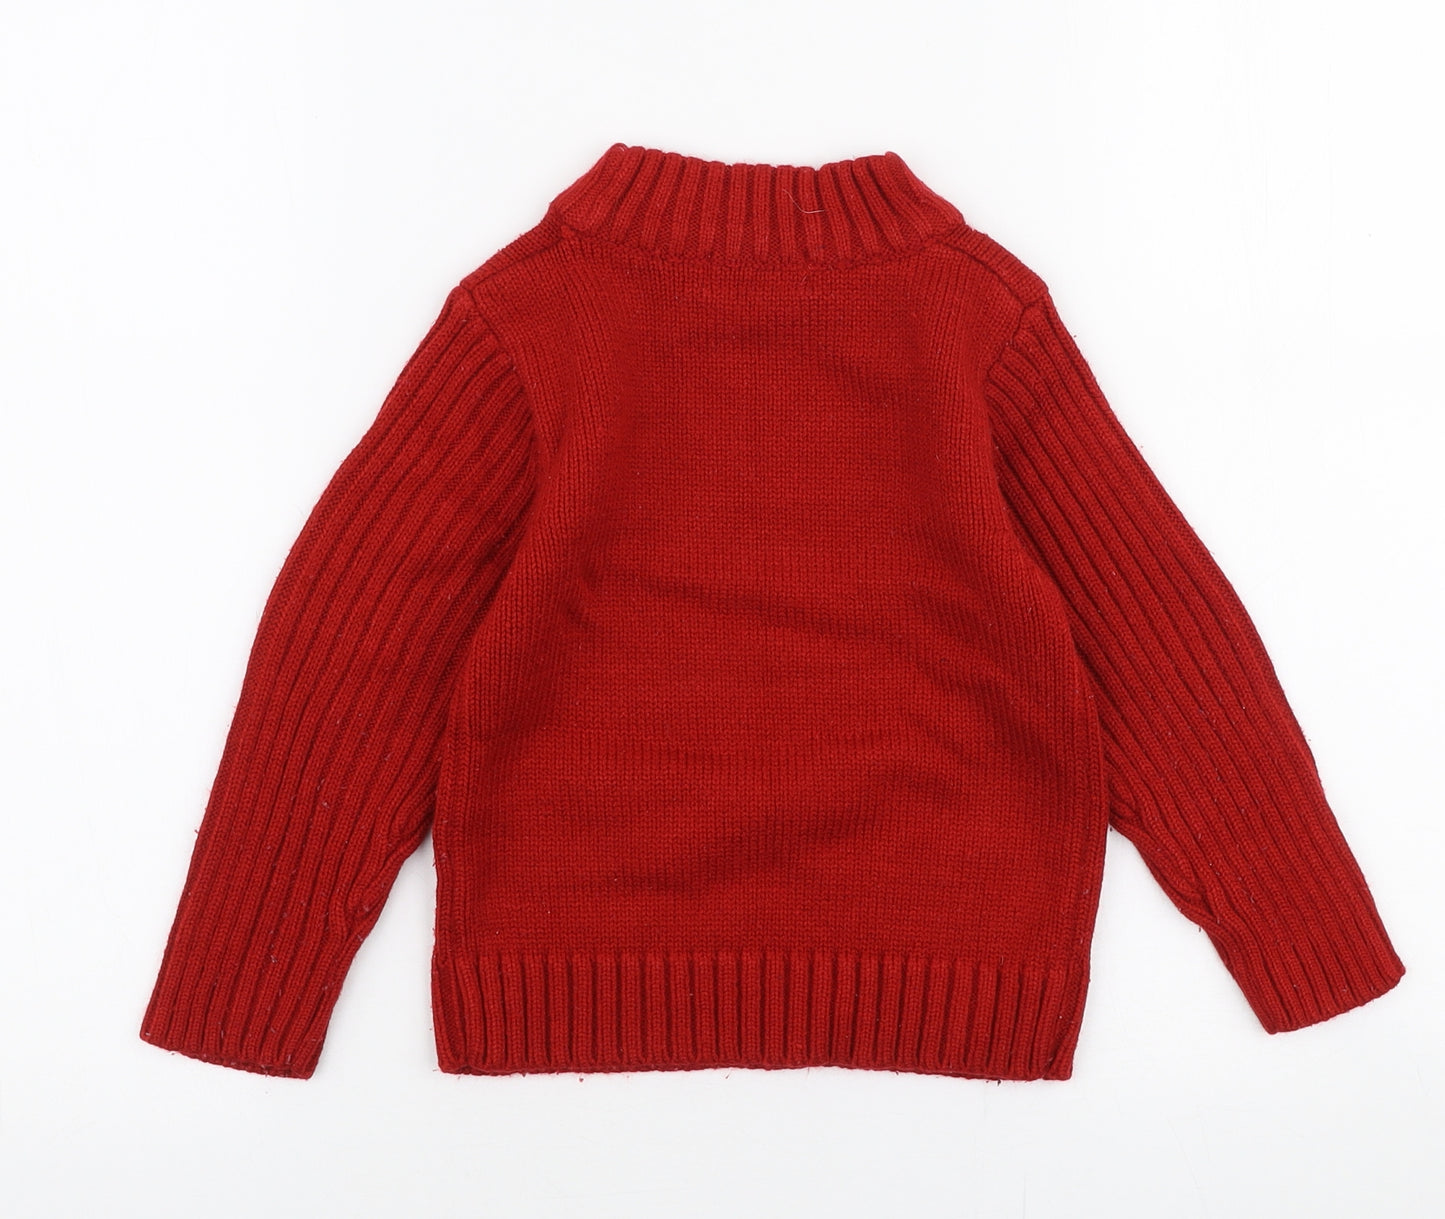 Mono Star Boys Red High Neck  Wool Pullover Jumper Size 4 Years  Pullover